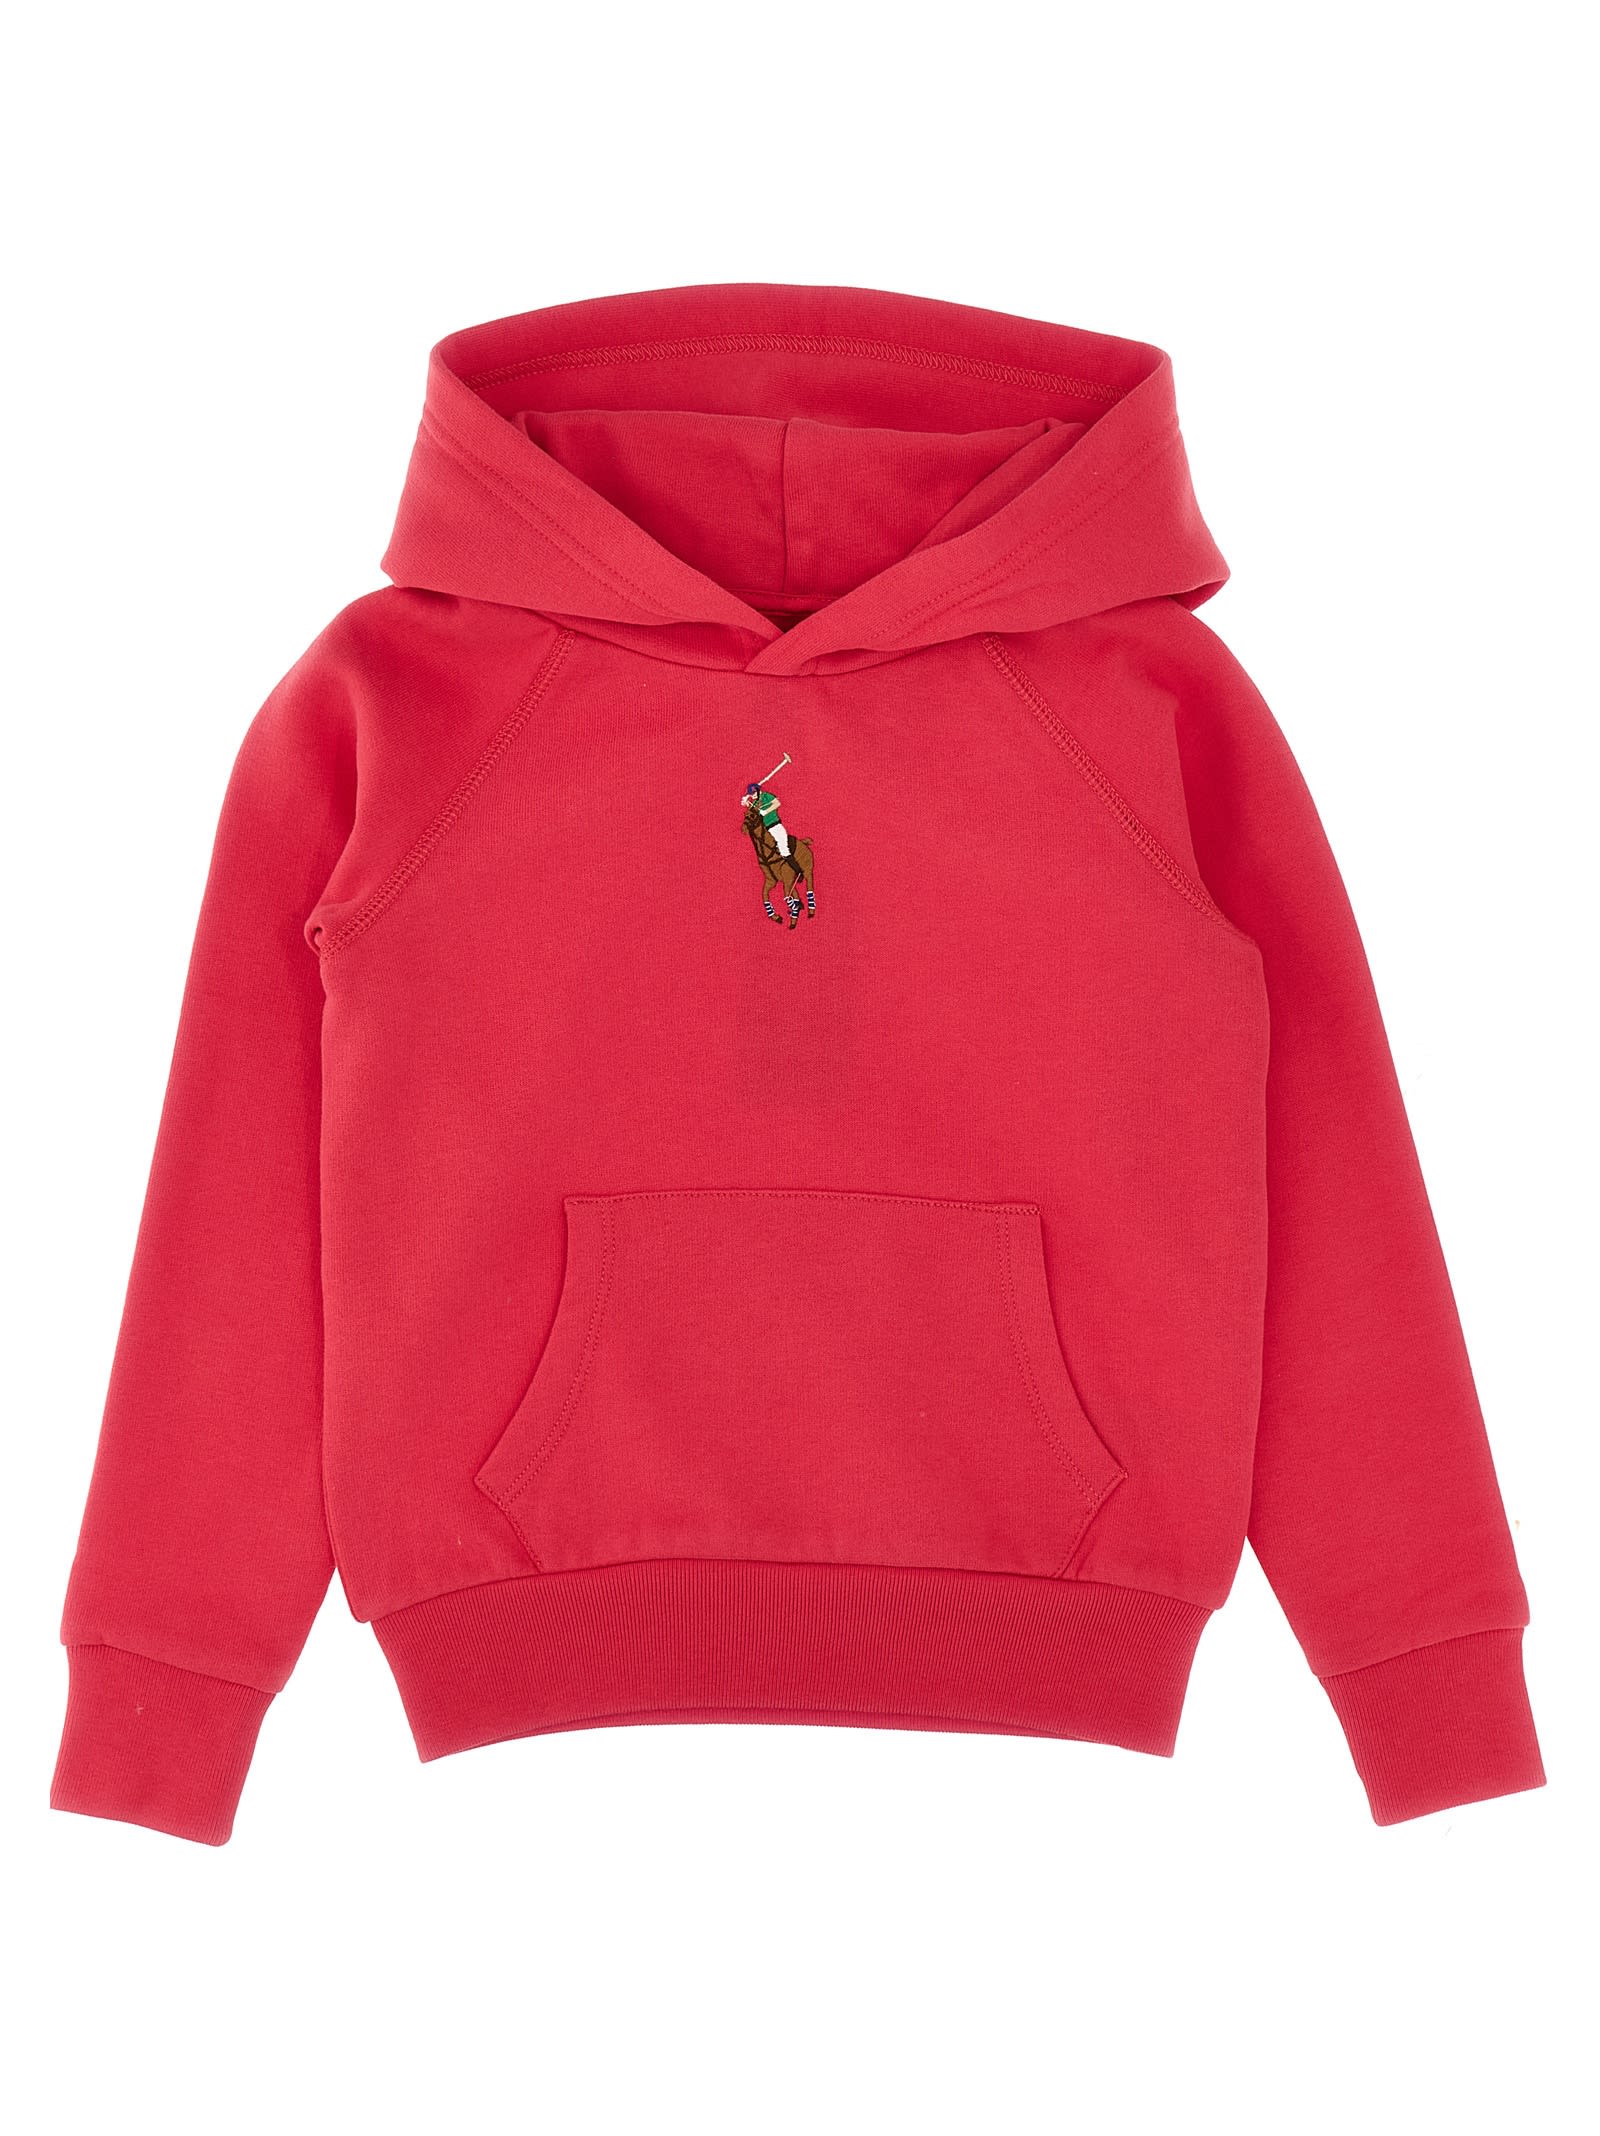 POLO RALPH LAUREN LOGO EMBROIDERED HOODIE